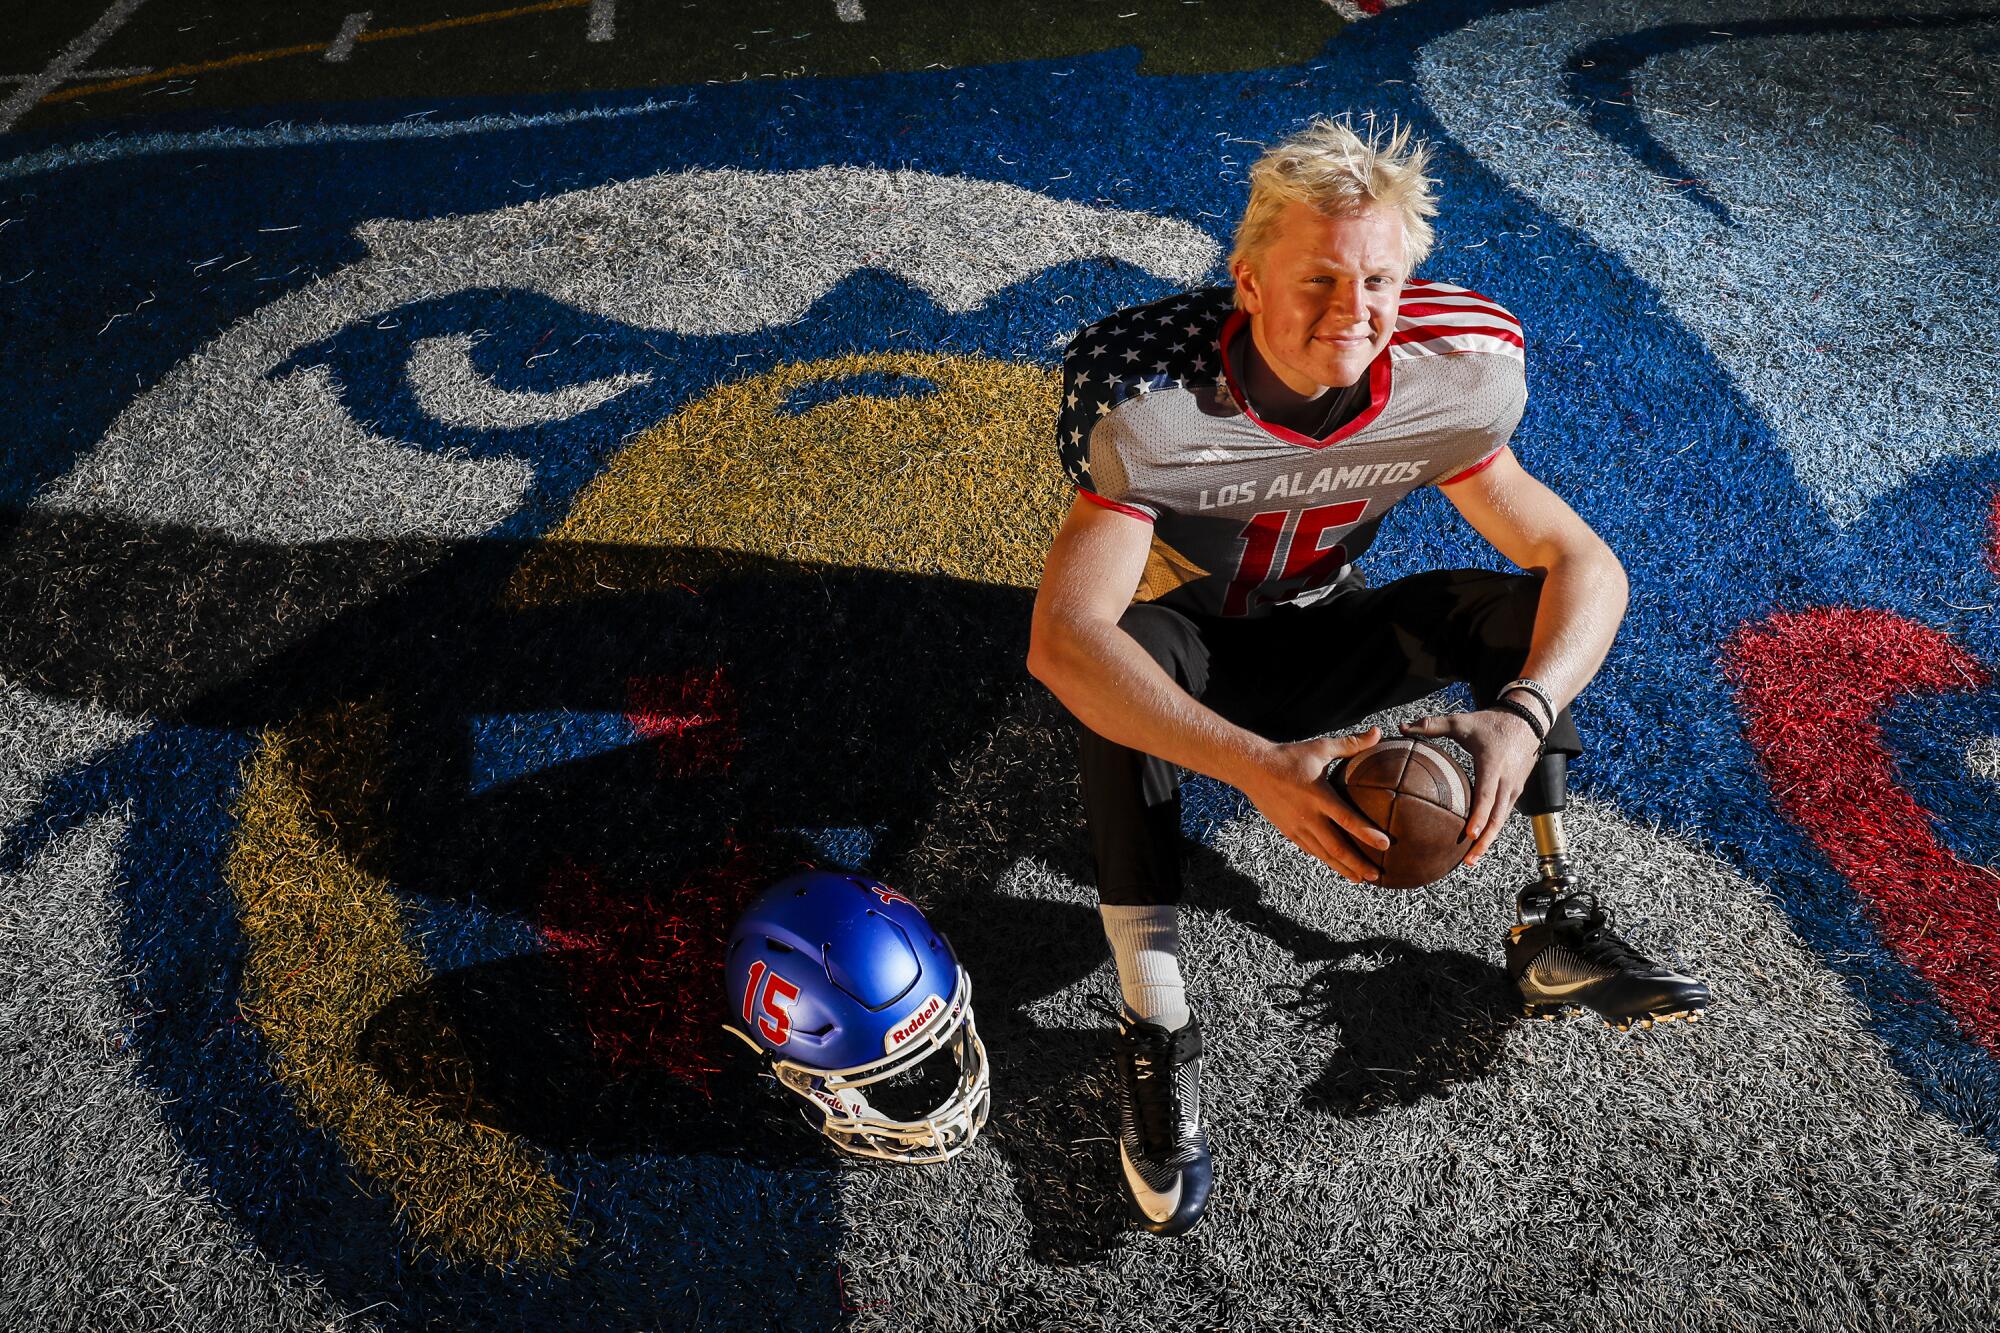 Los Alamitos long snapper Carson Fox sits on the field looking at the camera.